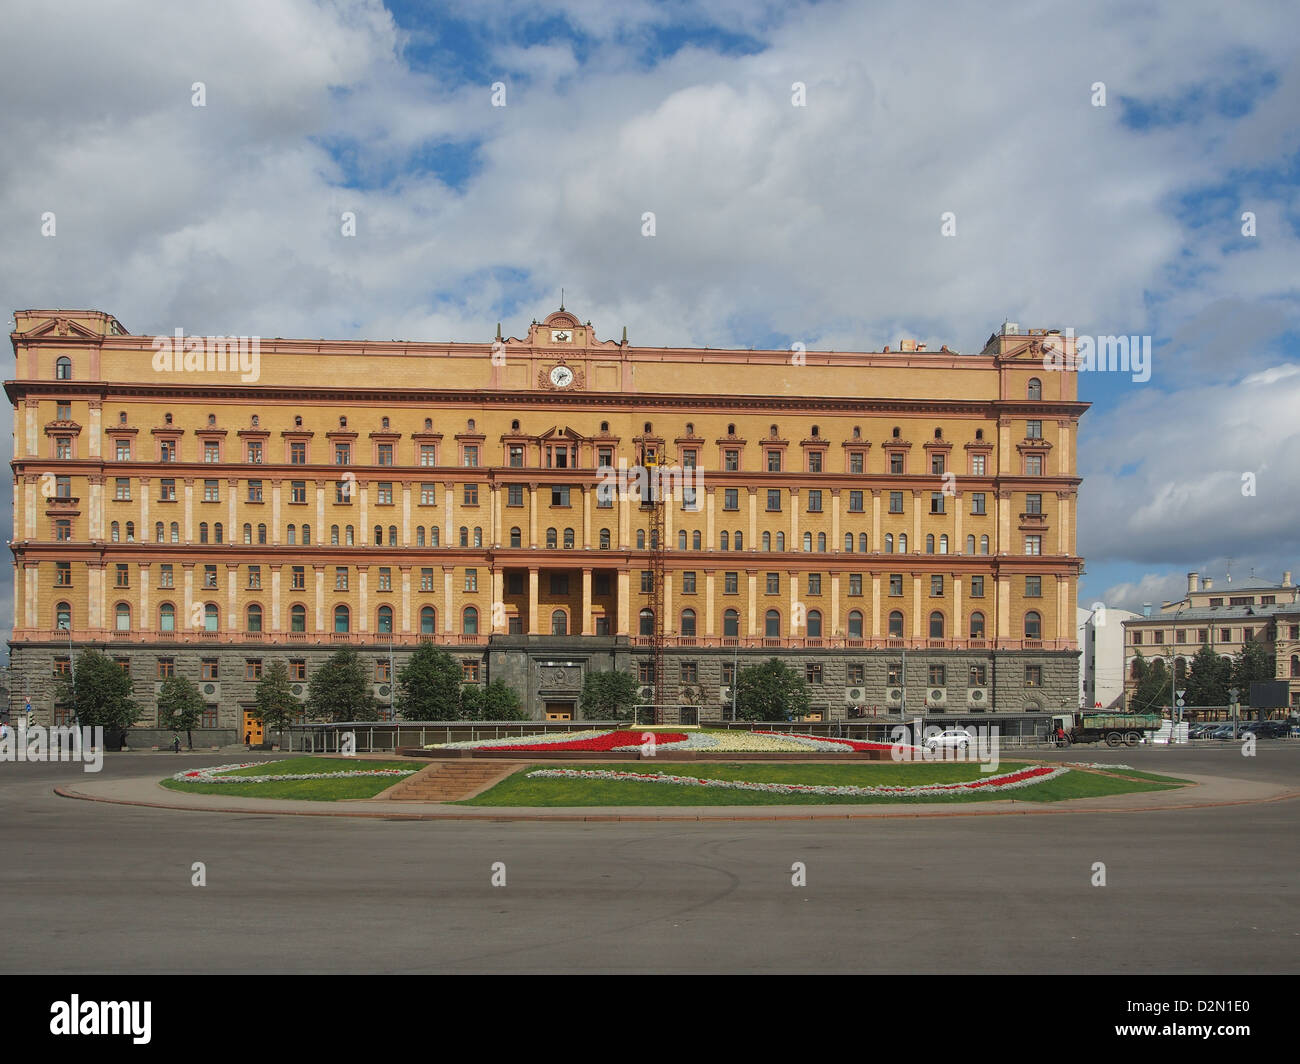 The infamous former headquarters of the KGB on Lubyanka Square, Moscow, Russia, Europe Stock Photo